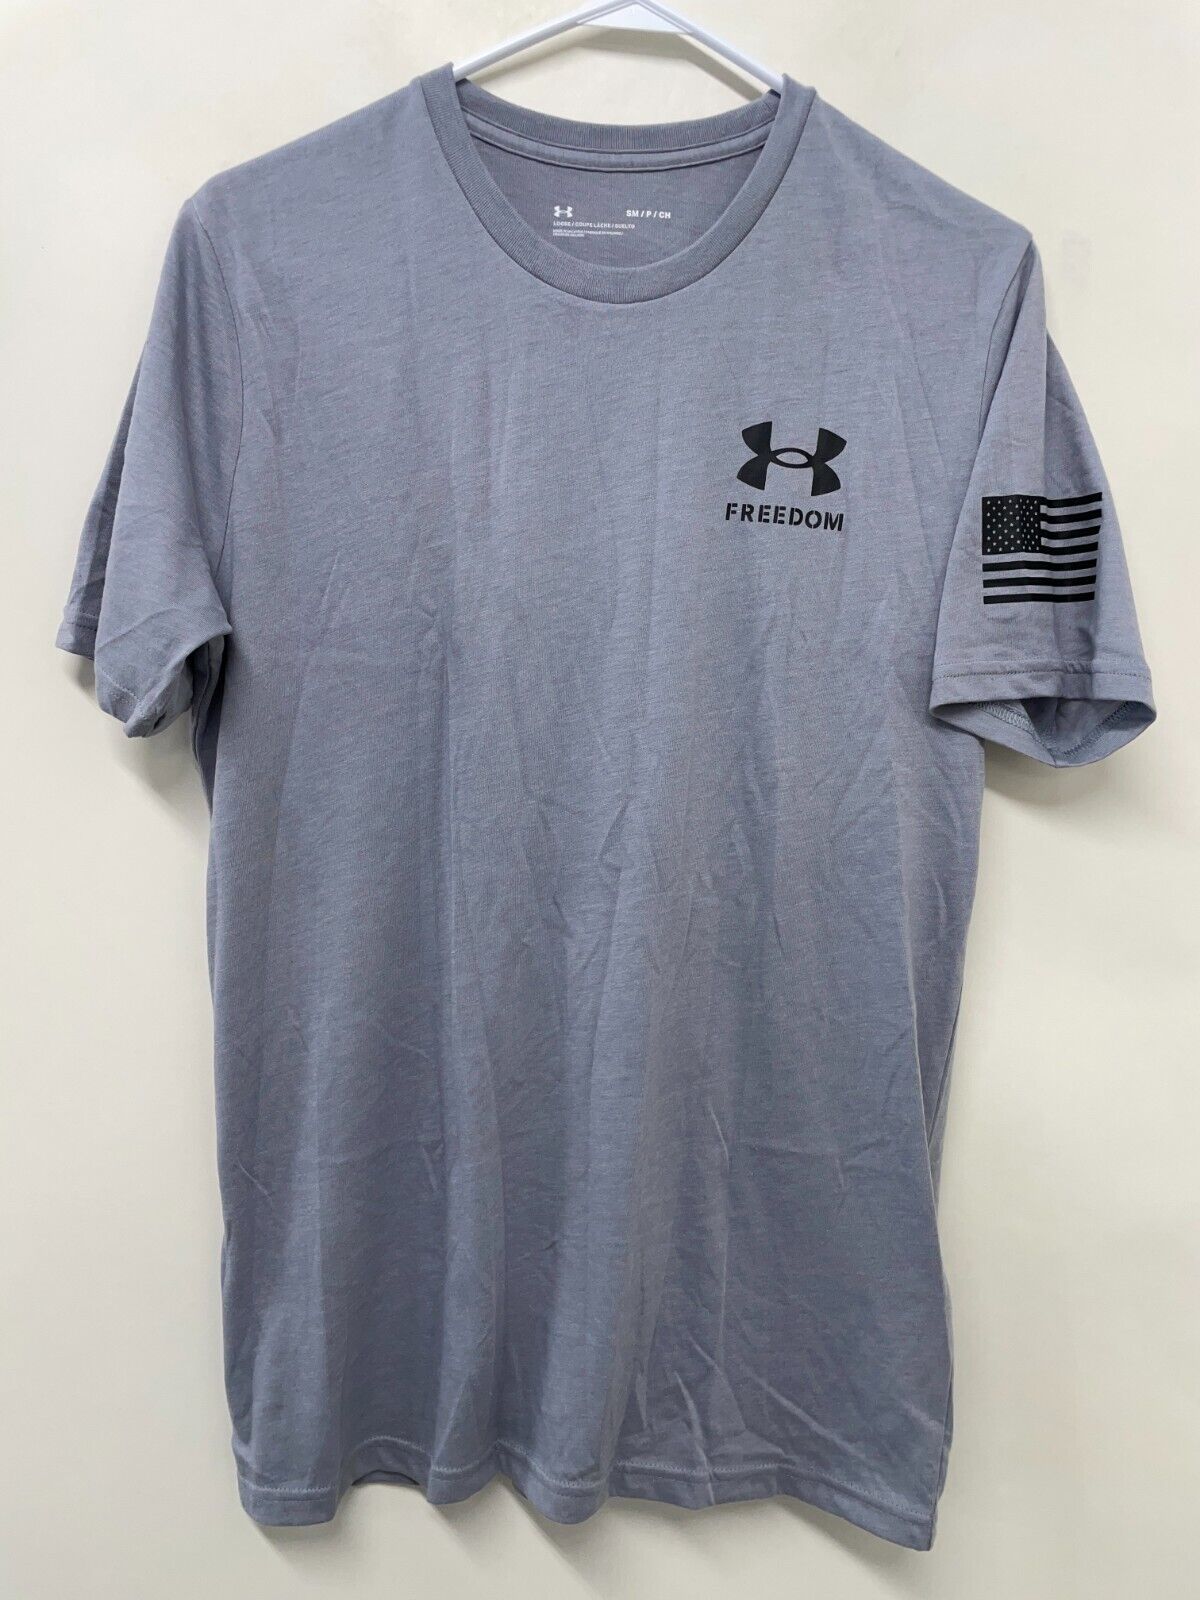 Under Armour Mens S New Freedom Flag T-Shirt Short Sleeve Graphic Tee 1370810